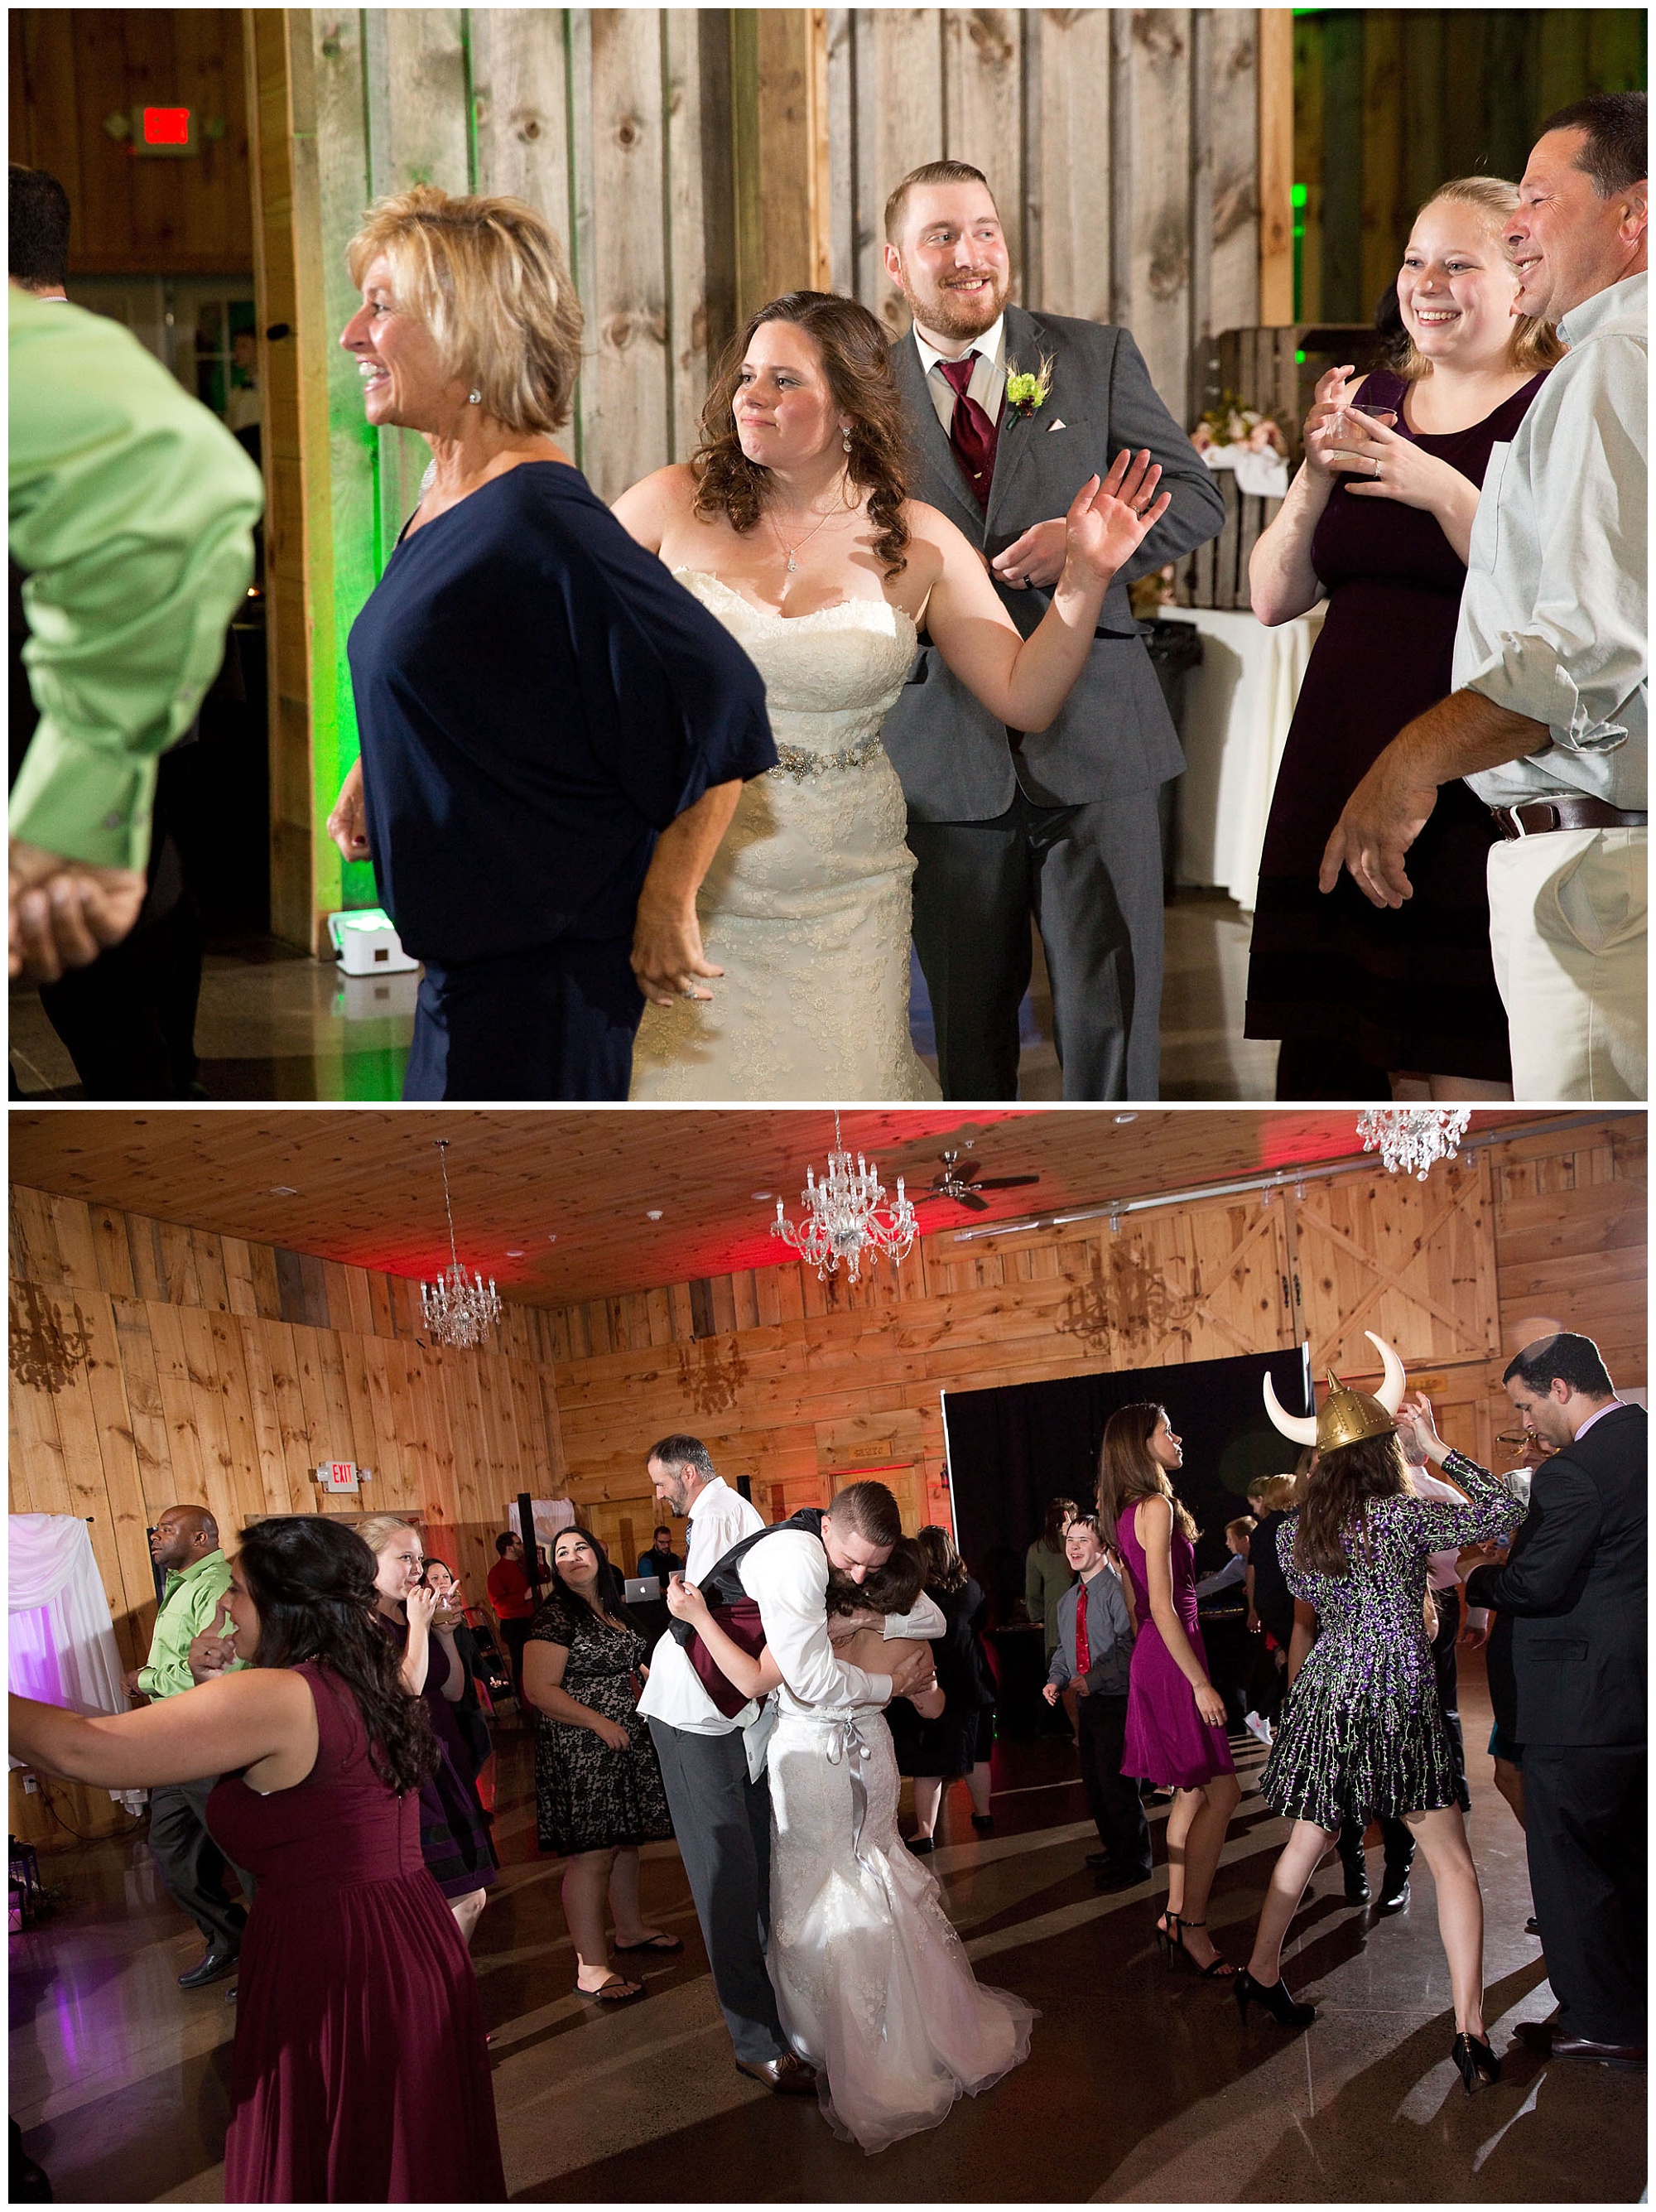 Photos of dancing family and guest at the wedding reception.